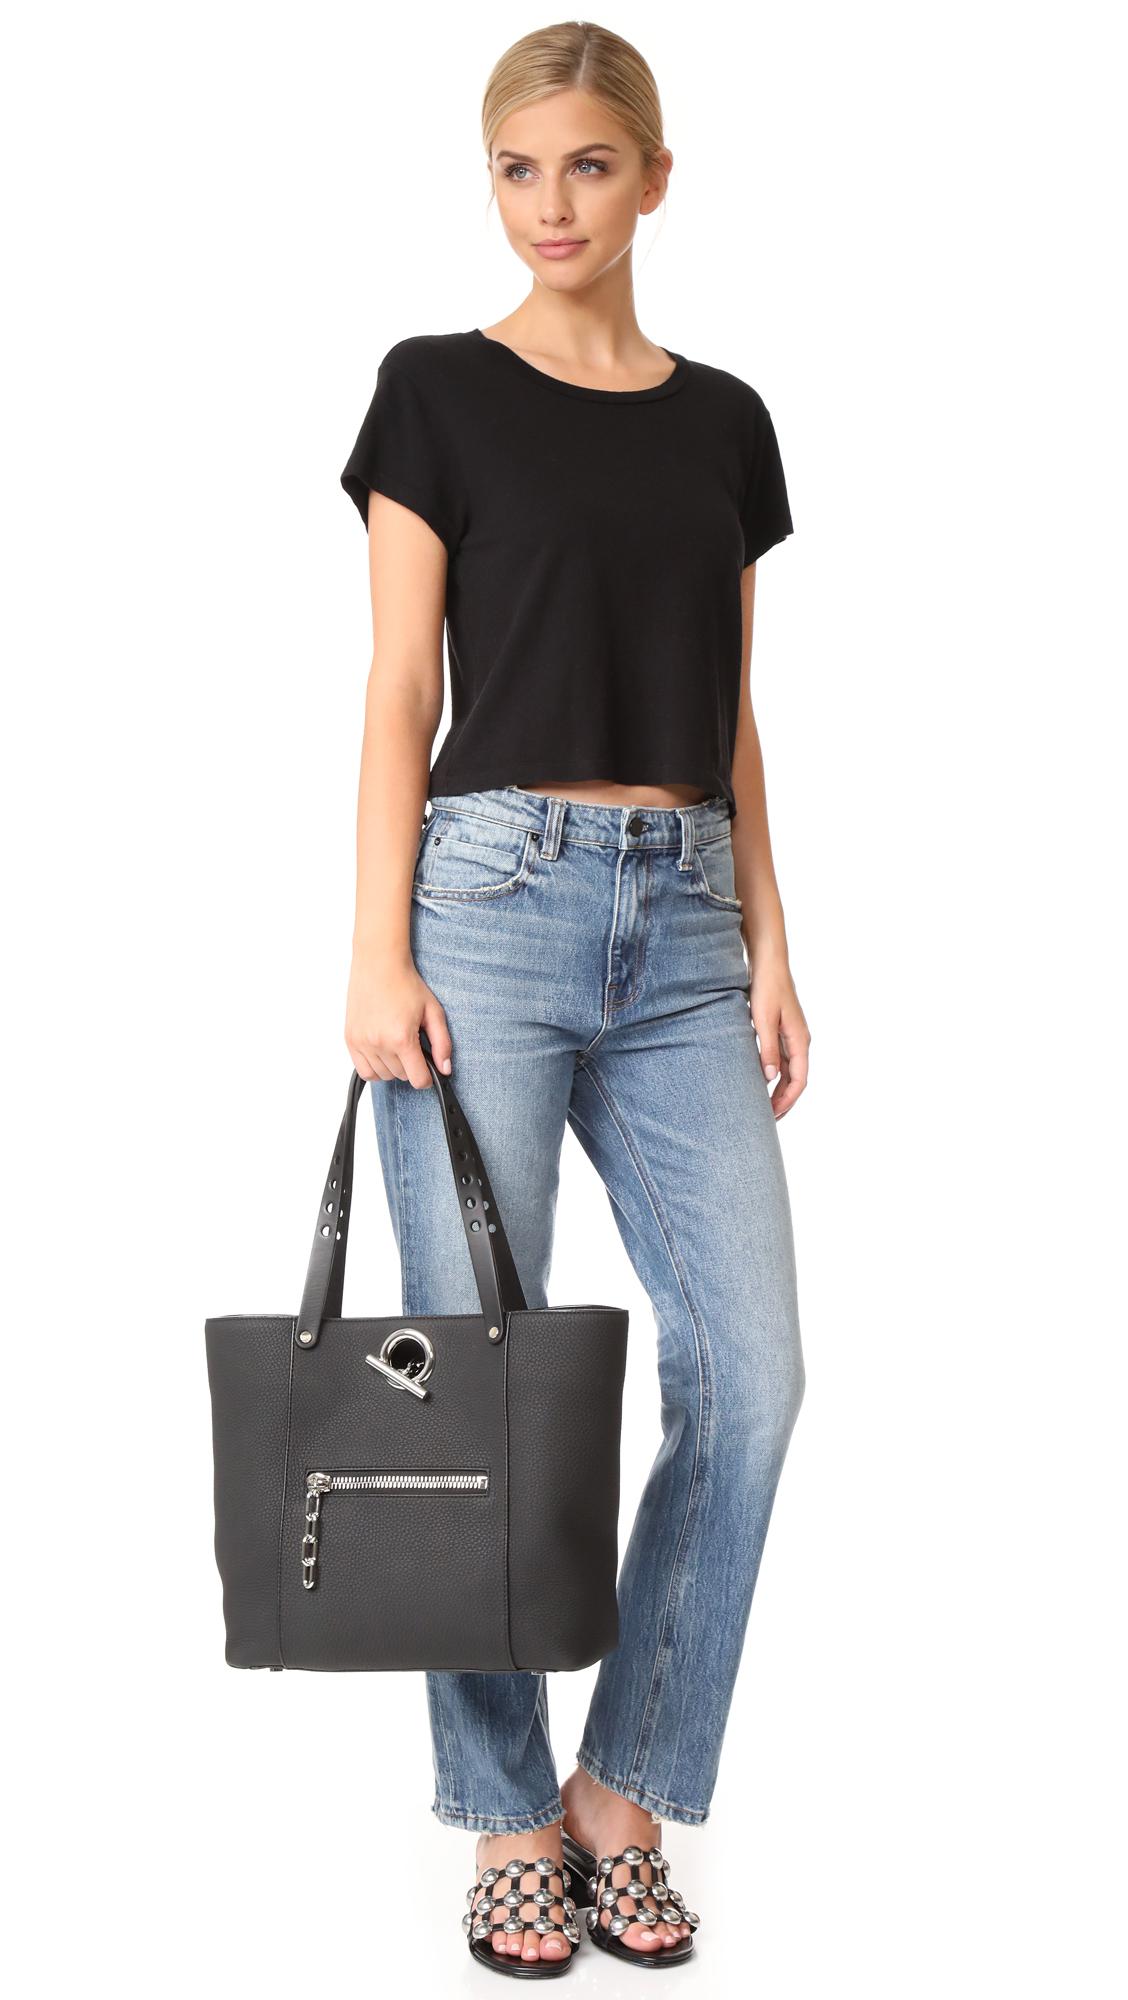 Alexander Wang Leather Riot Tote in Black - Lyst